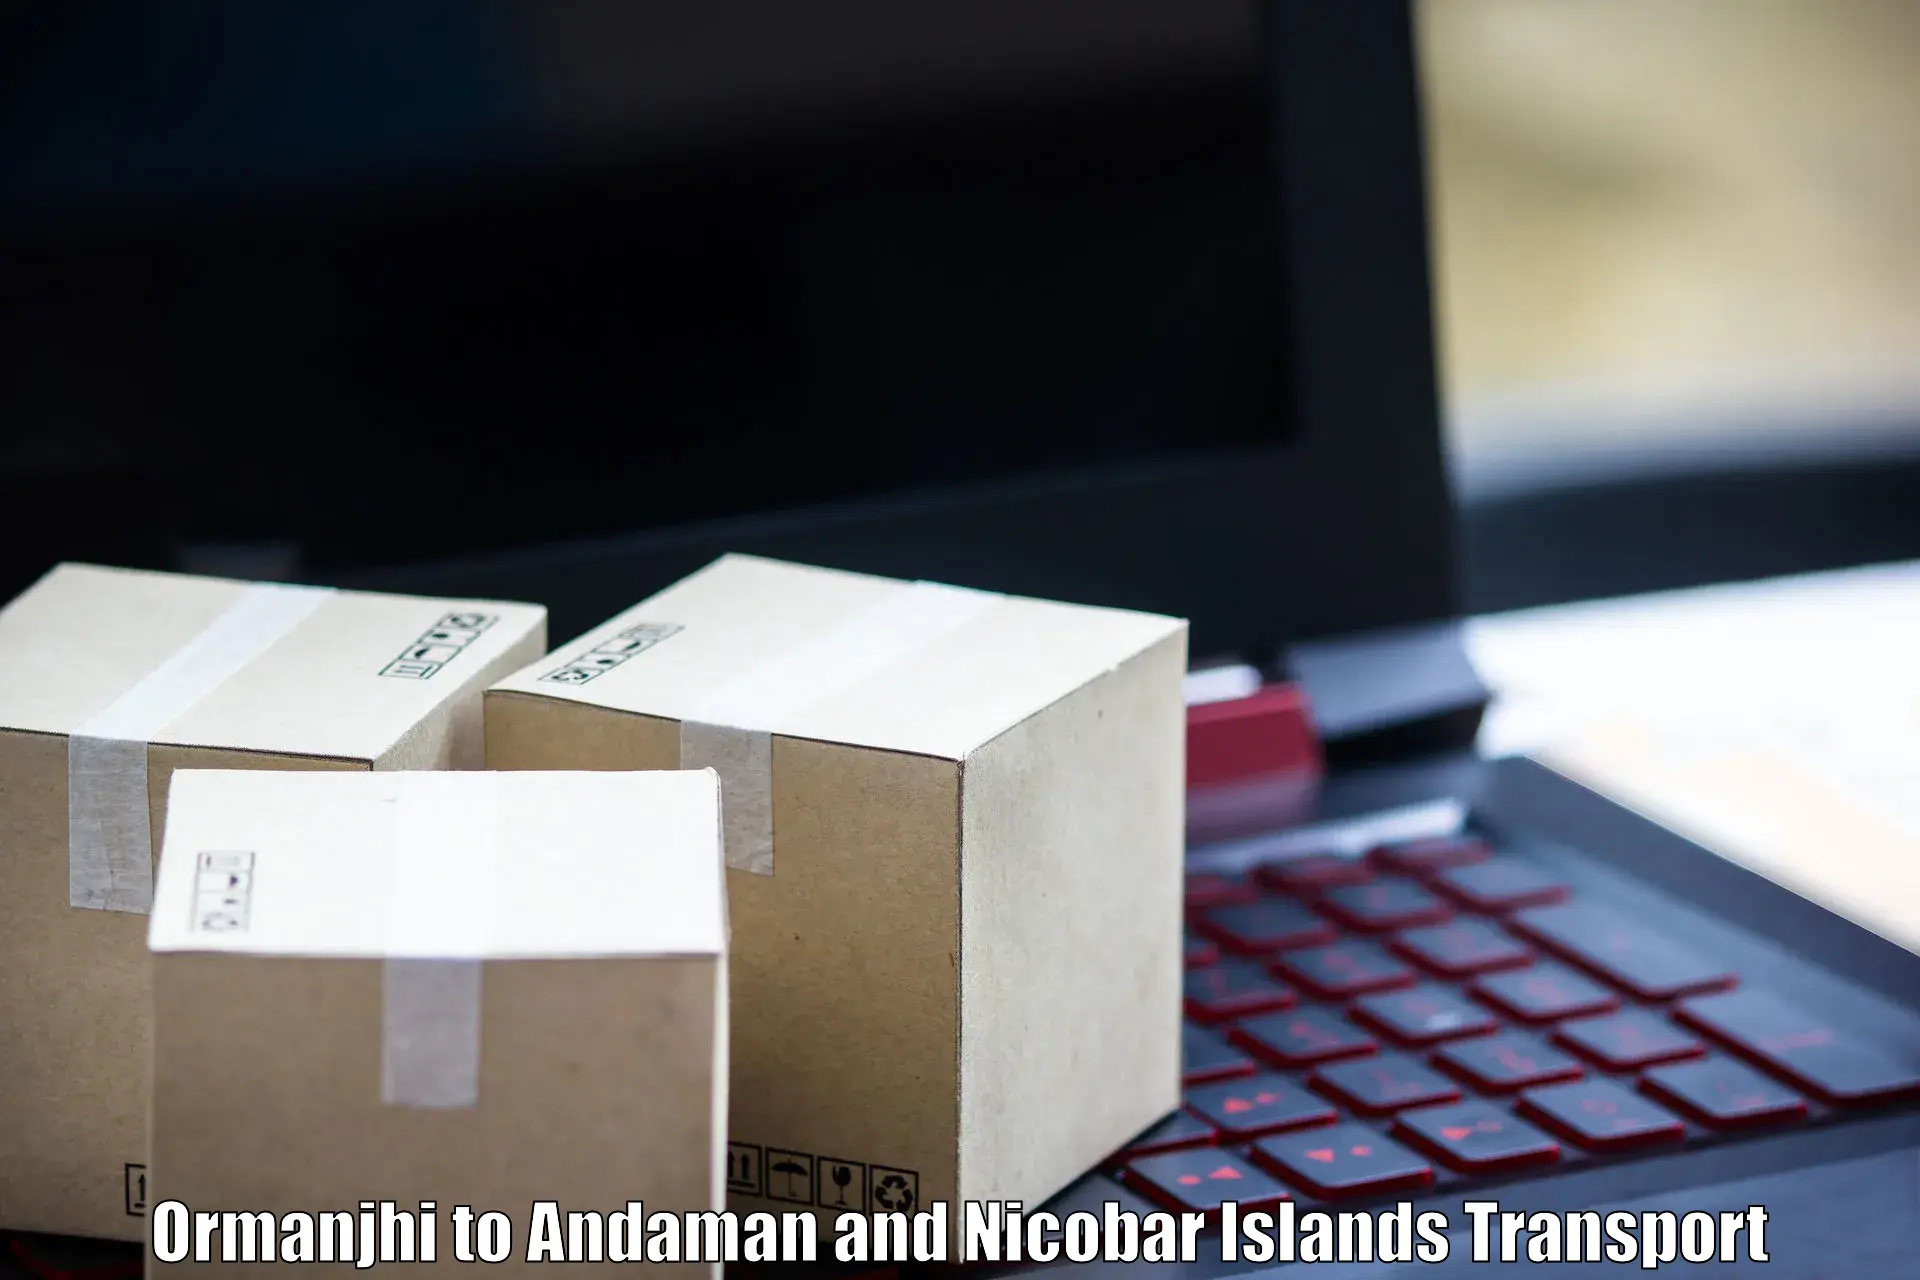 Lorry transport service in Ormanjhi to Andaman and Nicobar Islands